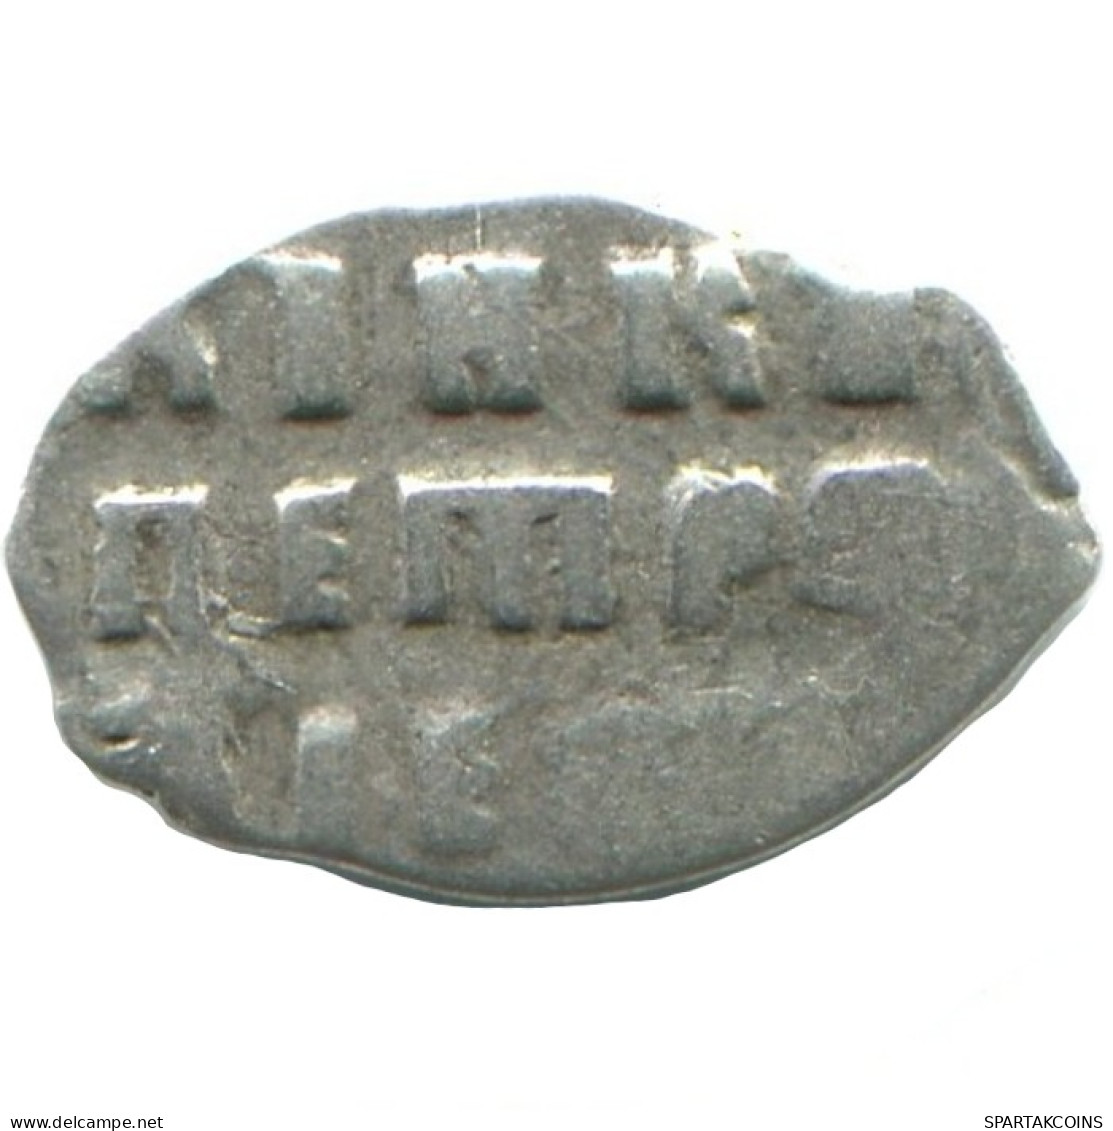 RUSSIE RUSSIA 1700 KOPECK PETER I OLD Mint MOSCOW ARGENT 0.3g/8mm #AB541.10.F.A - Russie